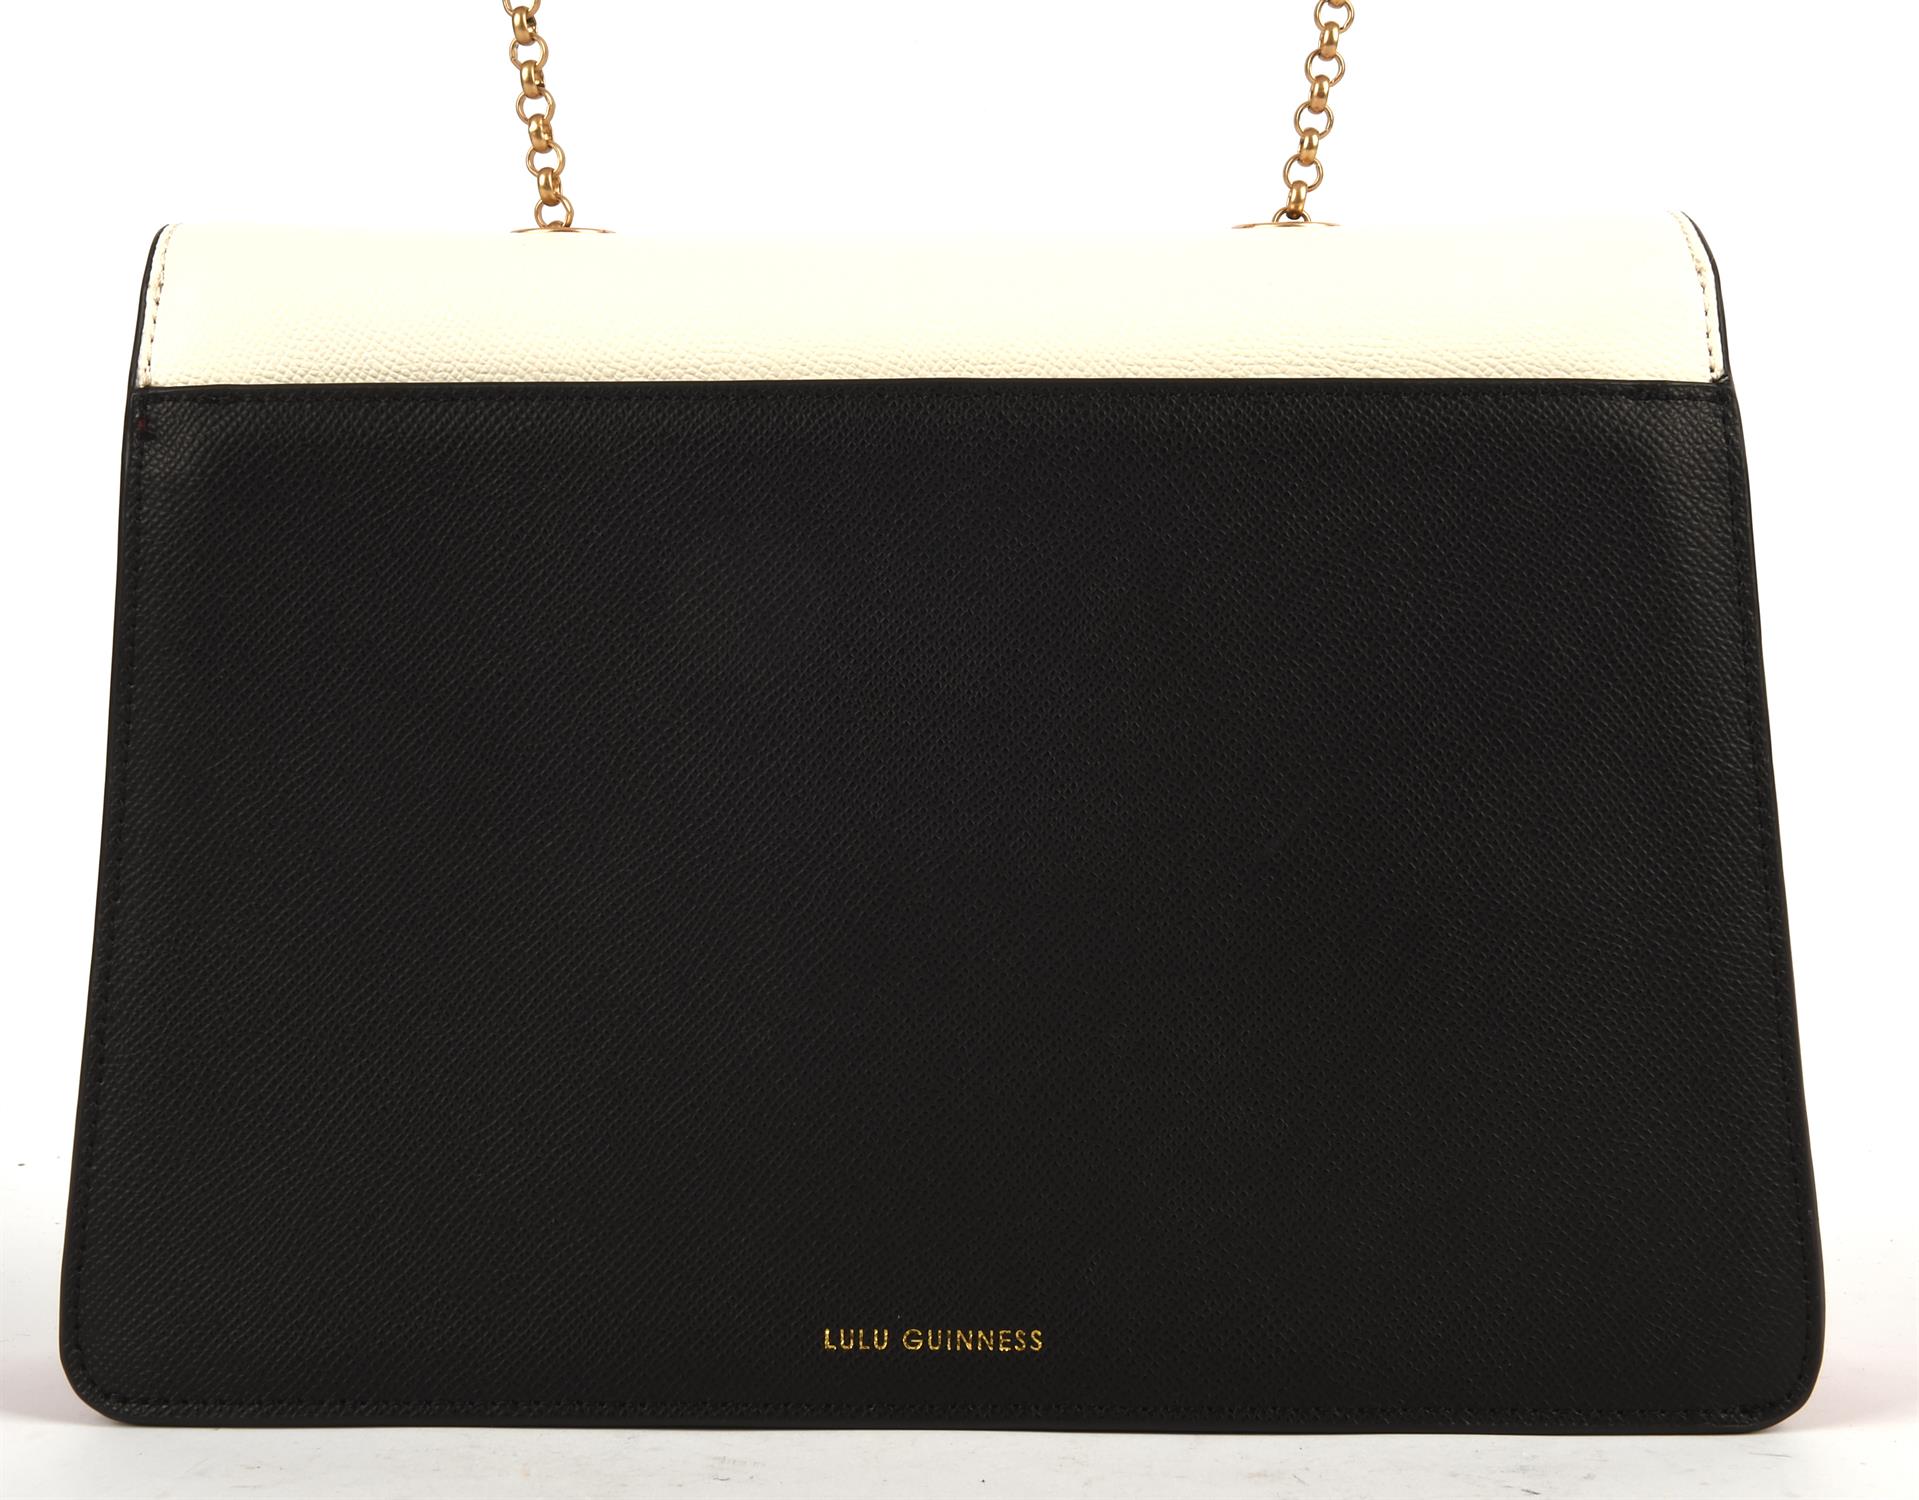 LULU GUINNESS red white and black grained leather handbag with gold chain, (Zara) dust bag and - Image 6 of 10